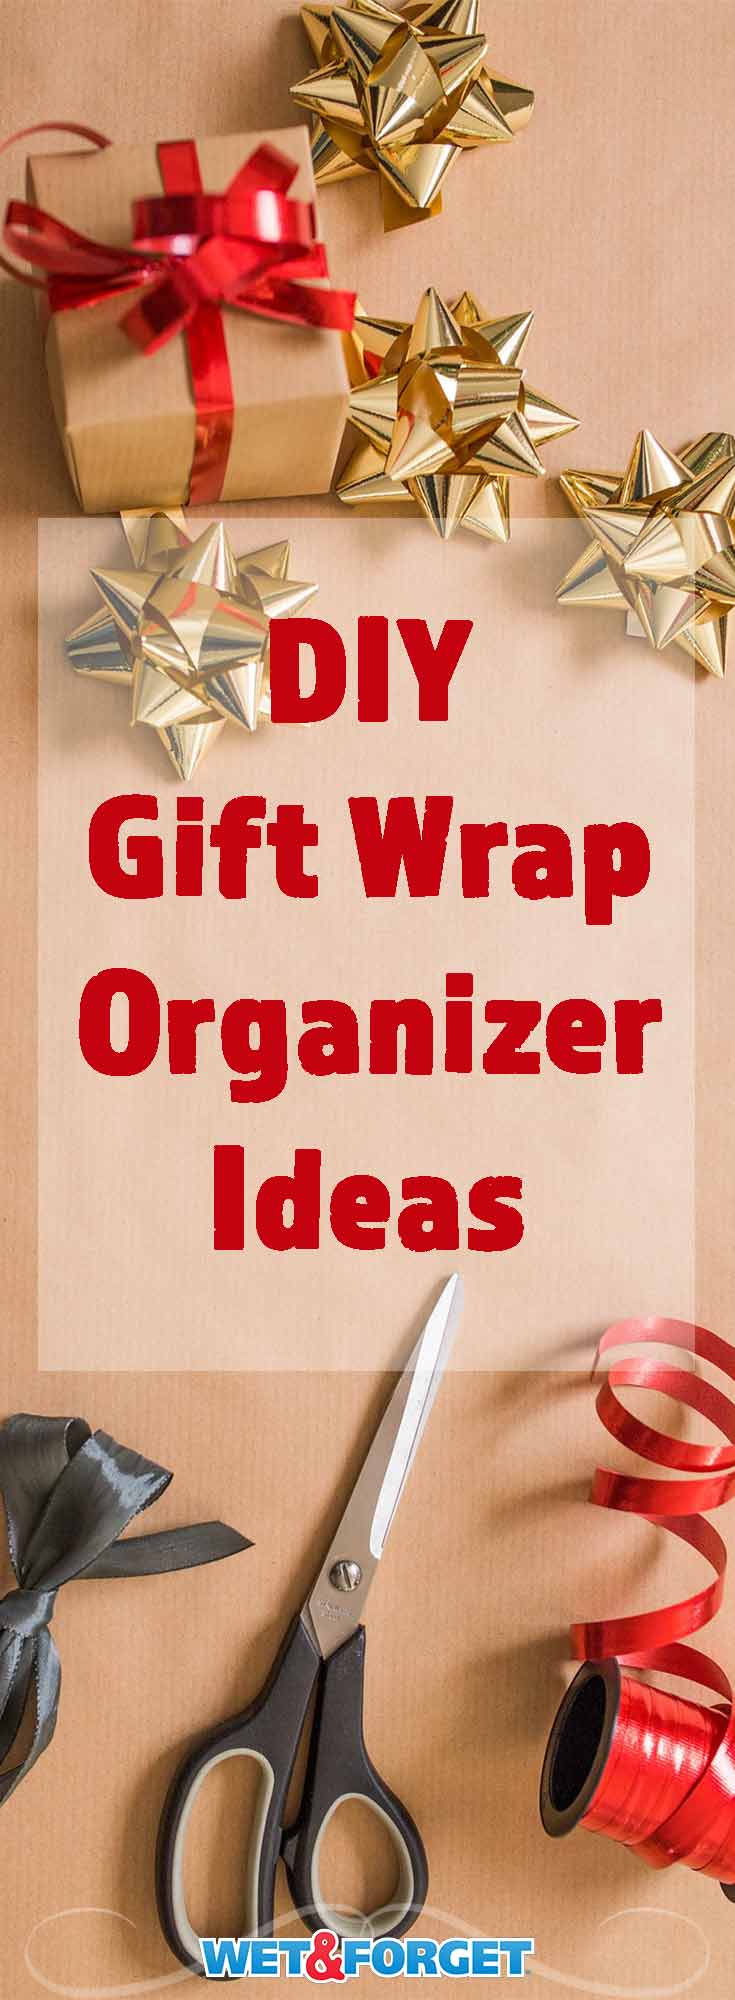 Organize your gift wrap, bags, ribbons and more with these easy DIY ideas!